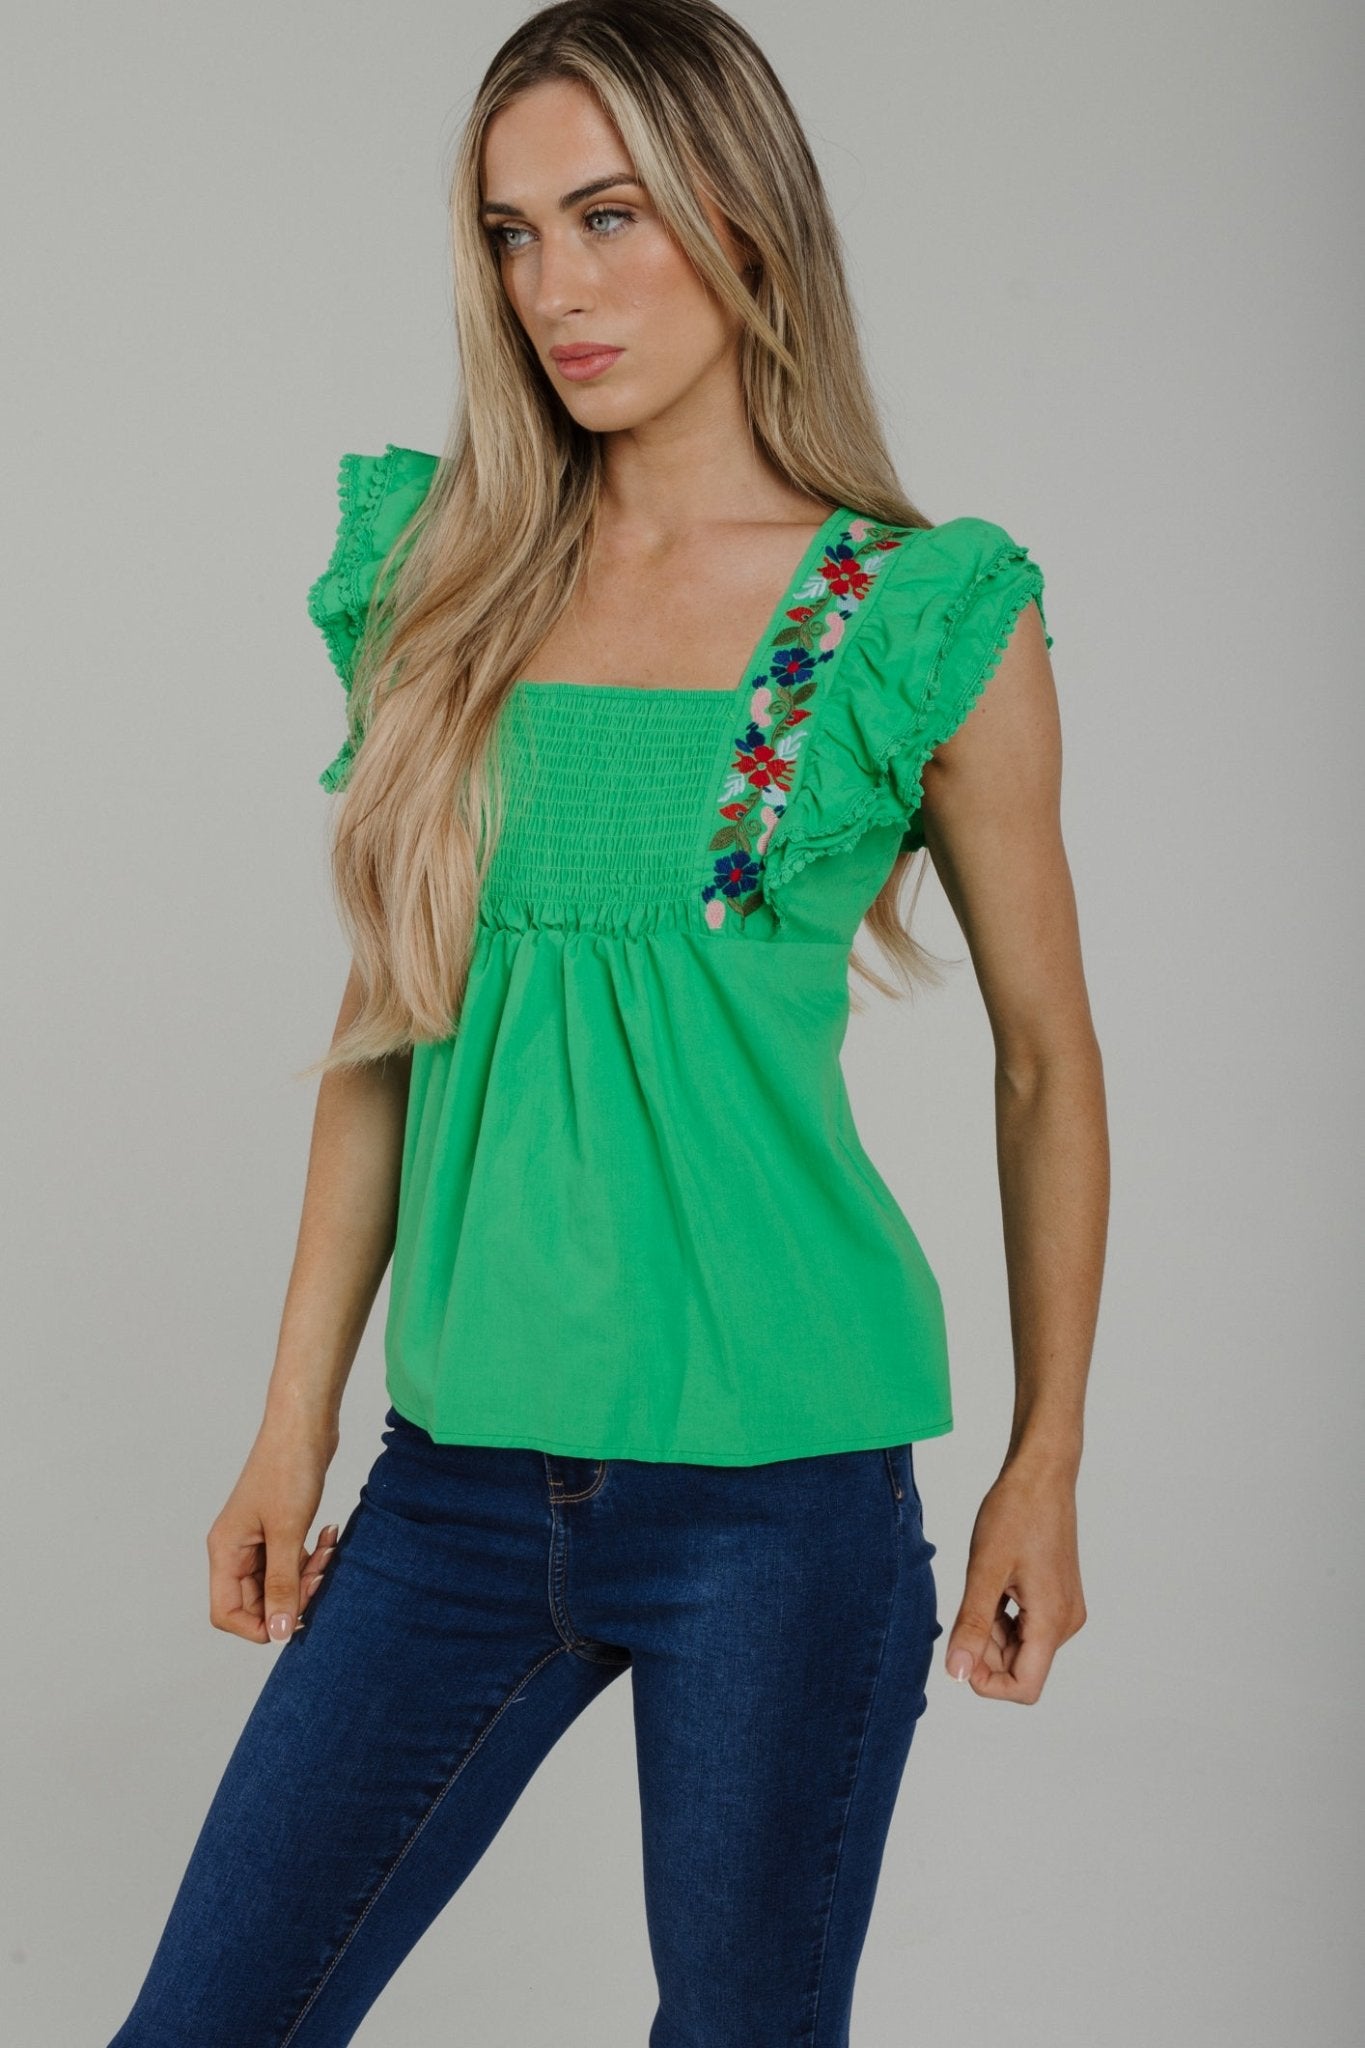 Sally Embroidered Smock Top In Green - The Walk in Wardrobe